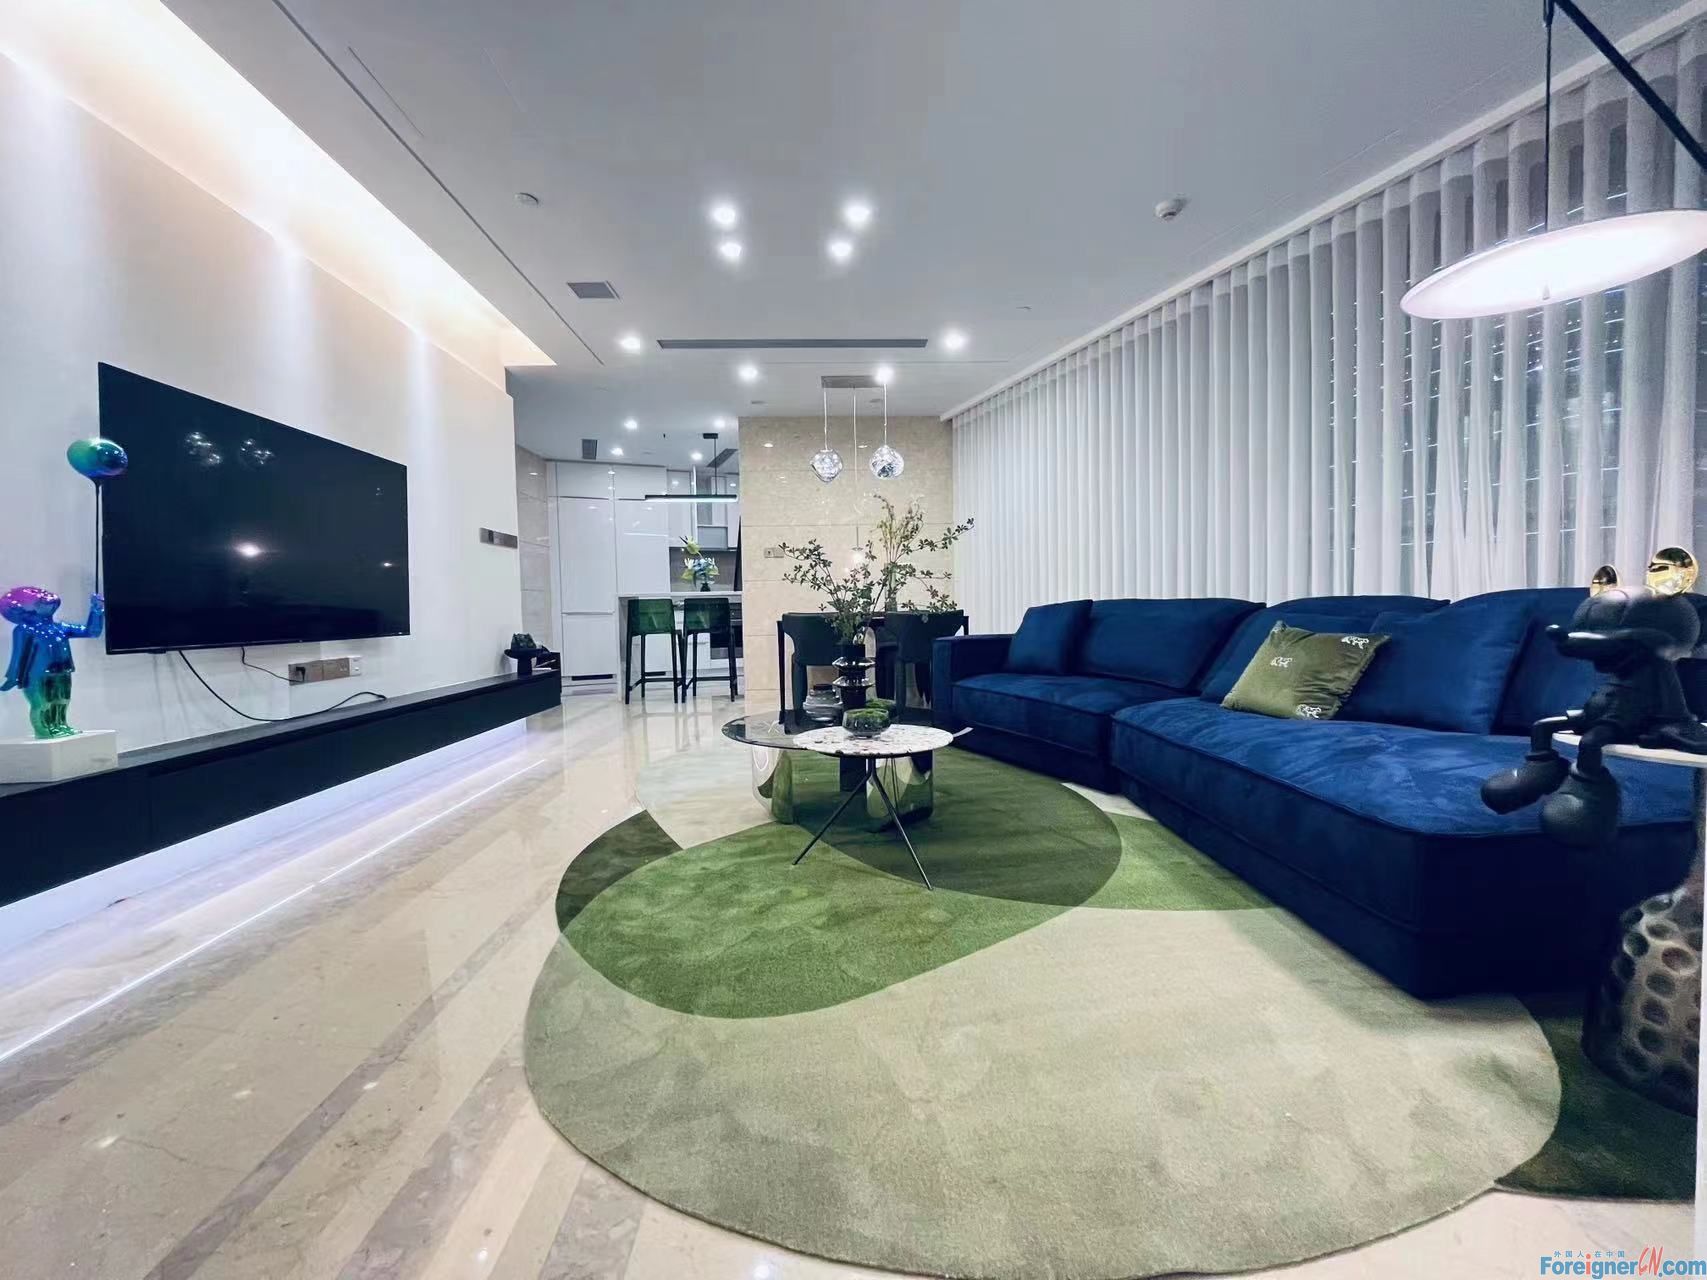 Luxurious !! High-end Suzhou center No.9 Apartment for Expats to rent in SIP /Modern/2 bedrooms and2 baths/fully furnished with central AC & floor heating/ city-view and Jinji Lake view/Suzhou,XingHai Square